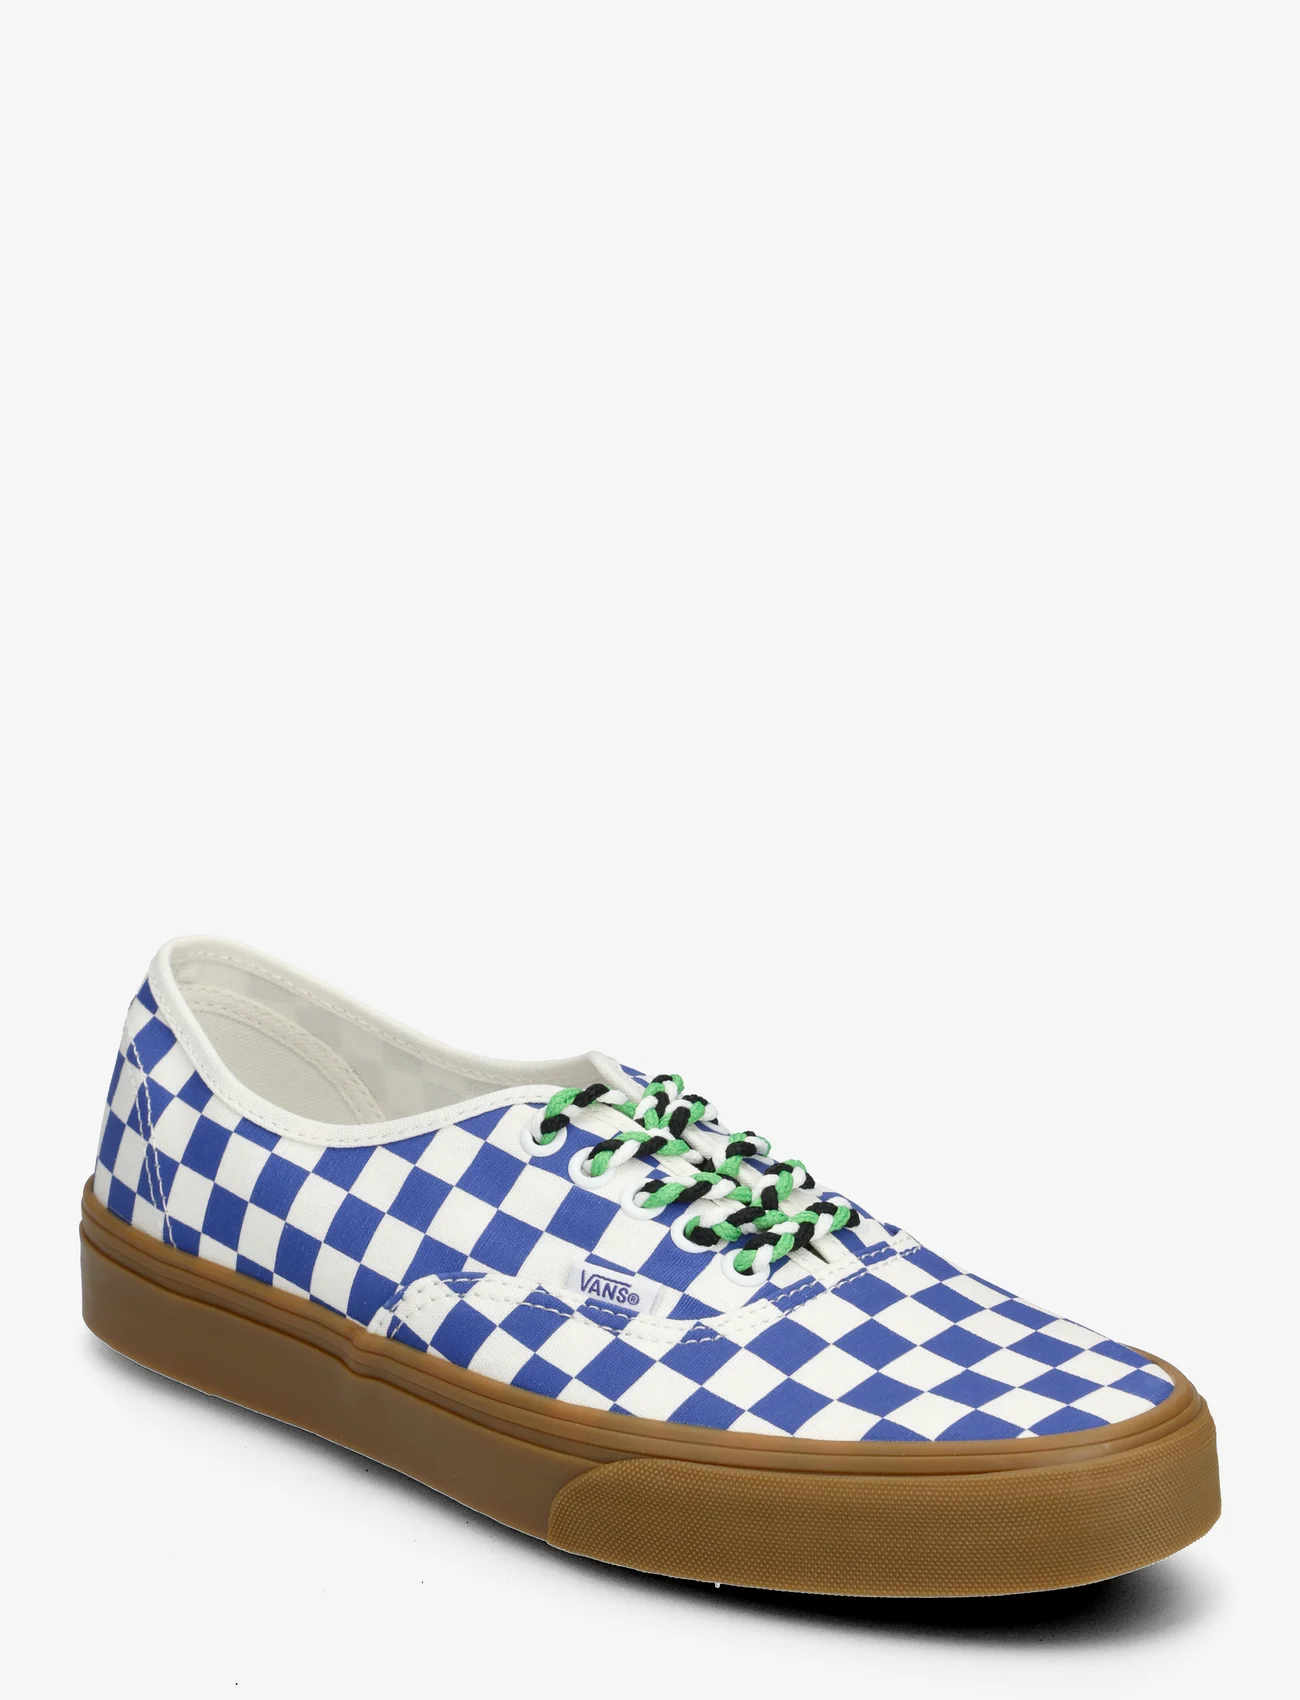 VANS - Authentic - lave sneakers - checkerboard blue/white - 0